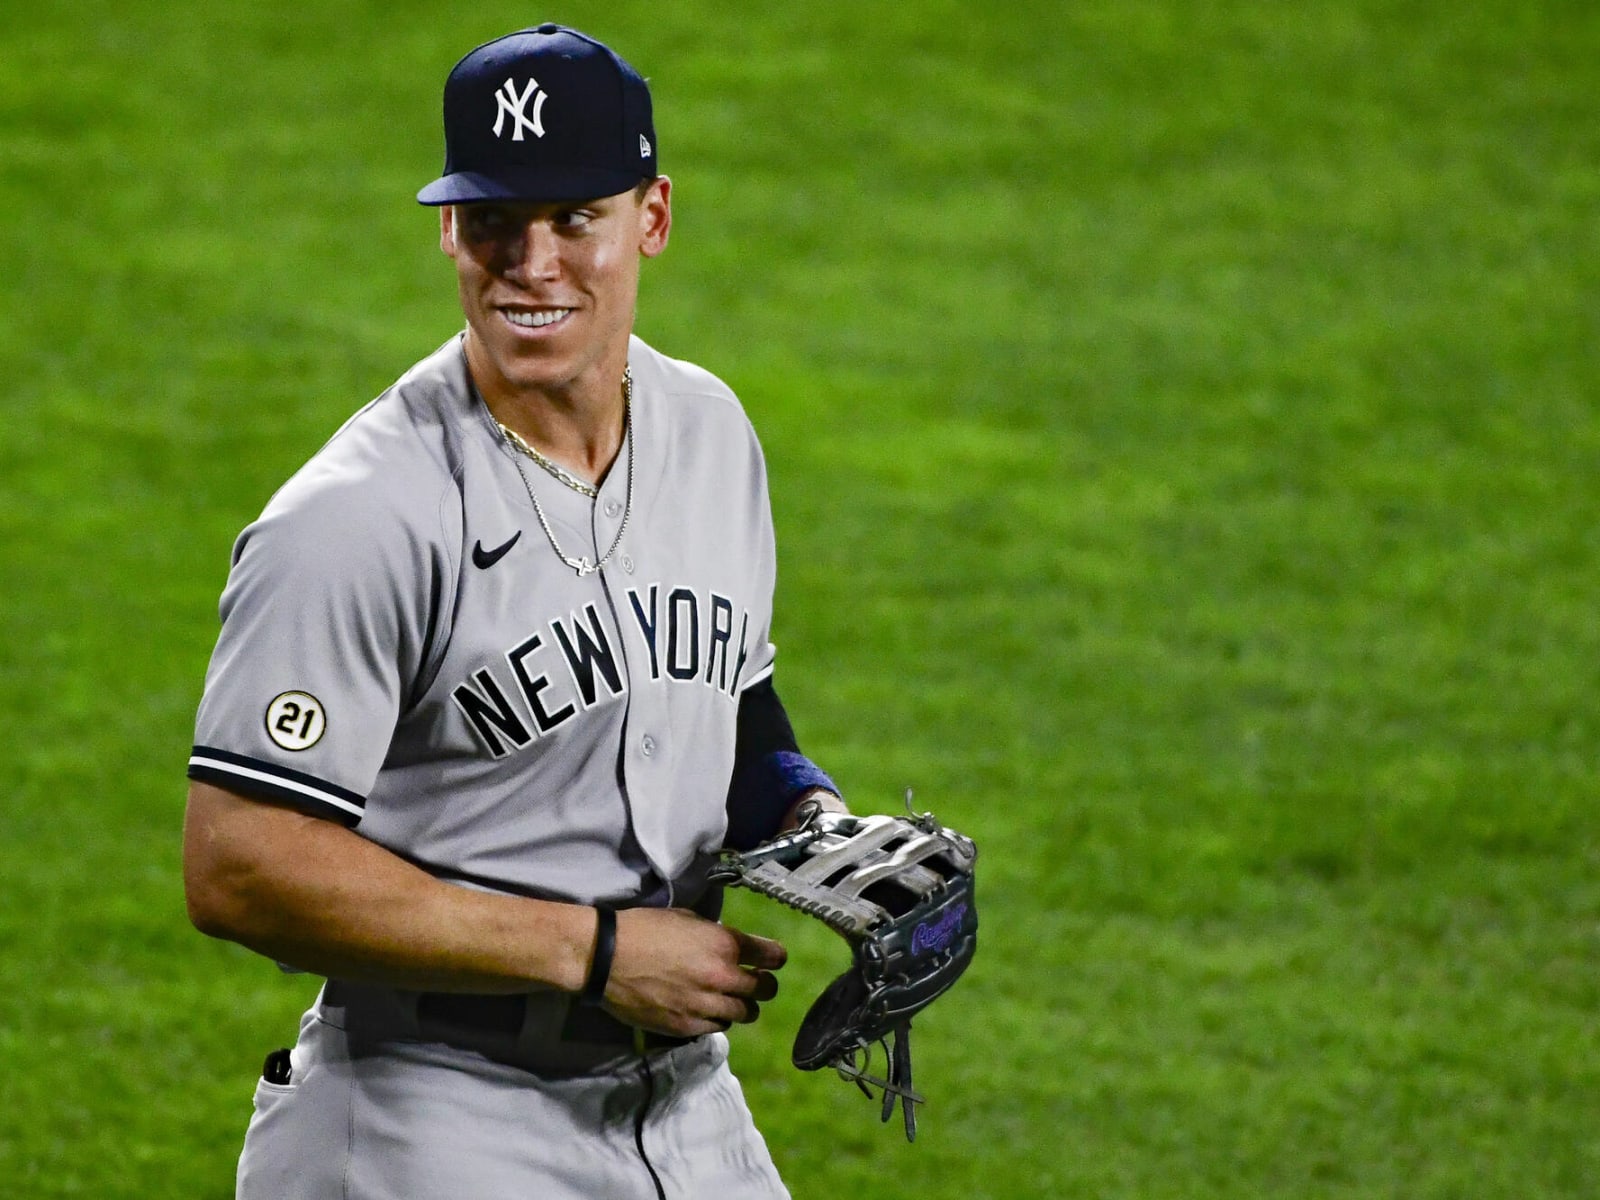 Yankees slugger Aaron Judge sparks controversy with glance at bench